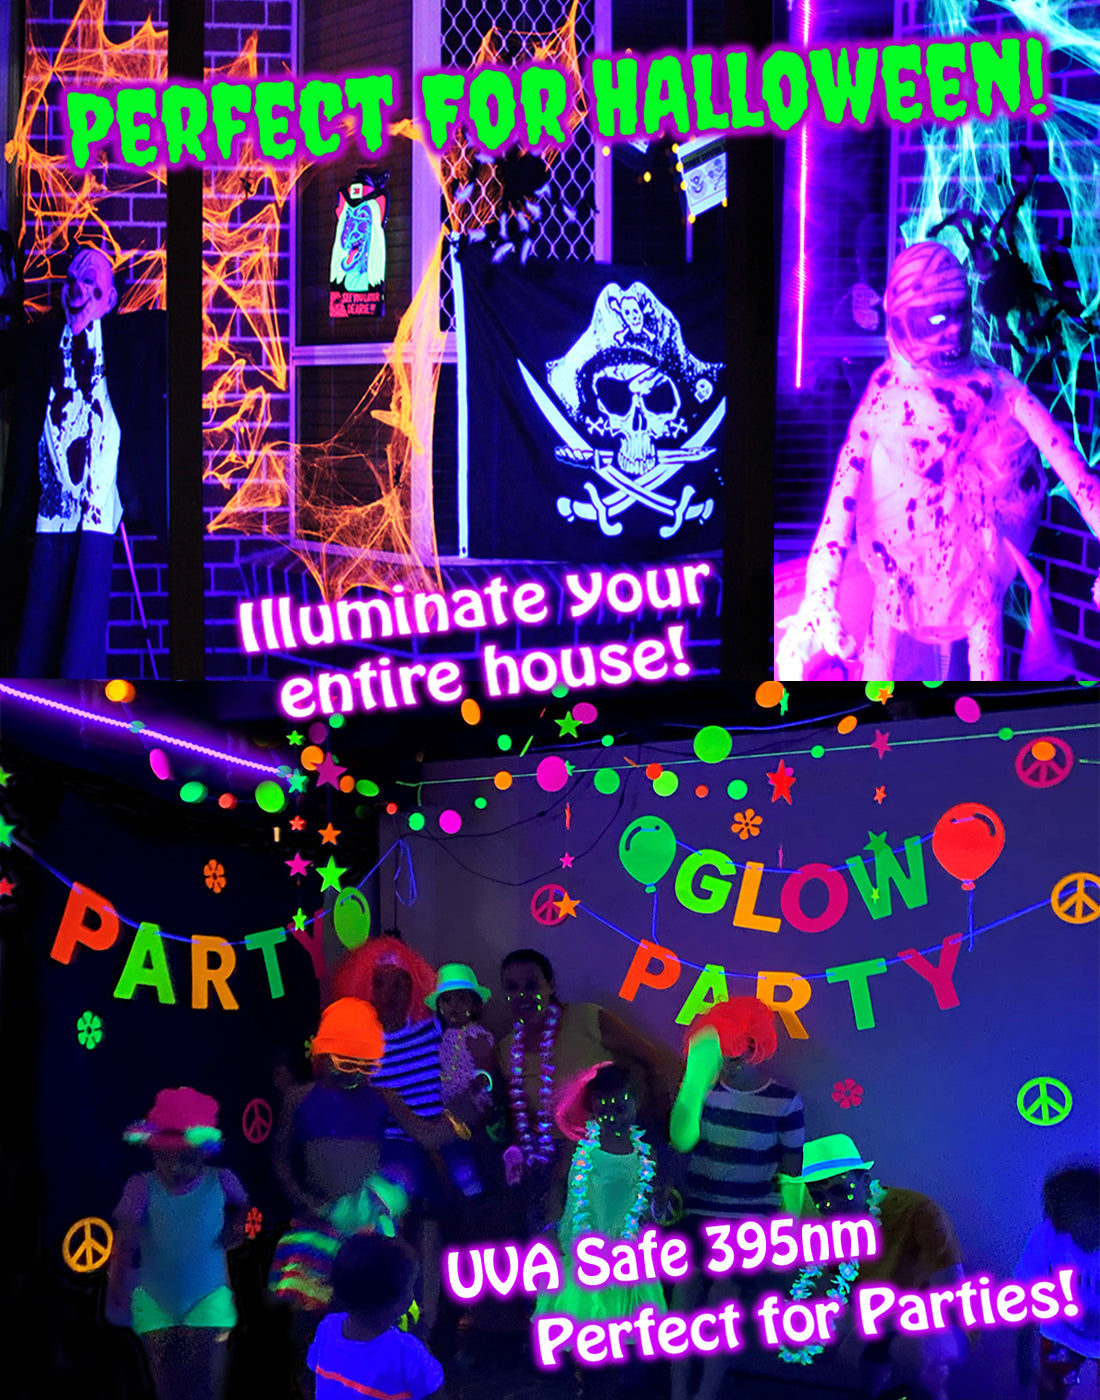 Black Light Glow Party Kit GLOWAVE! For epic glow in the dark